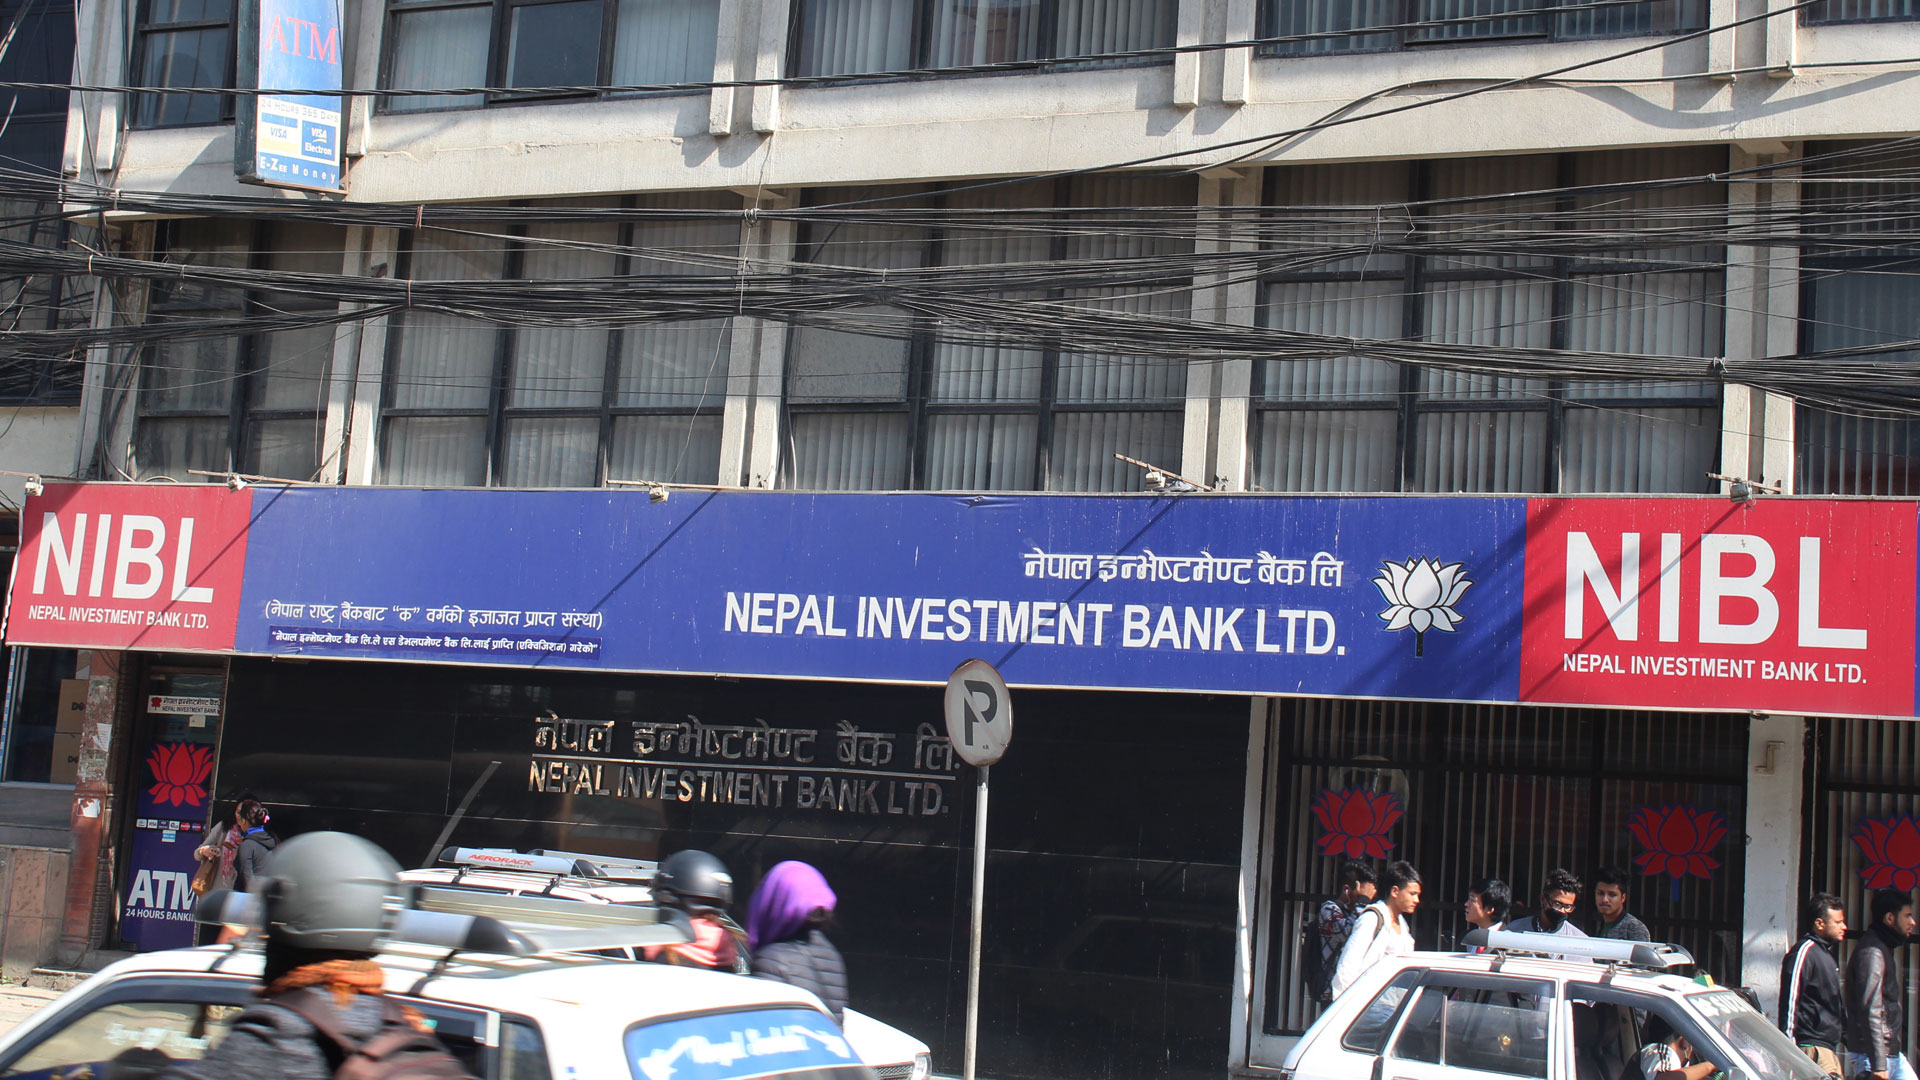 Nepal investment bank